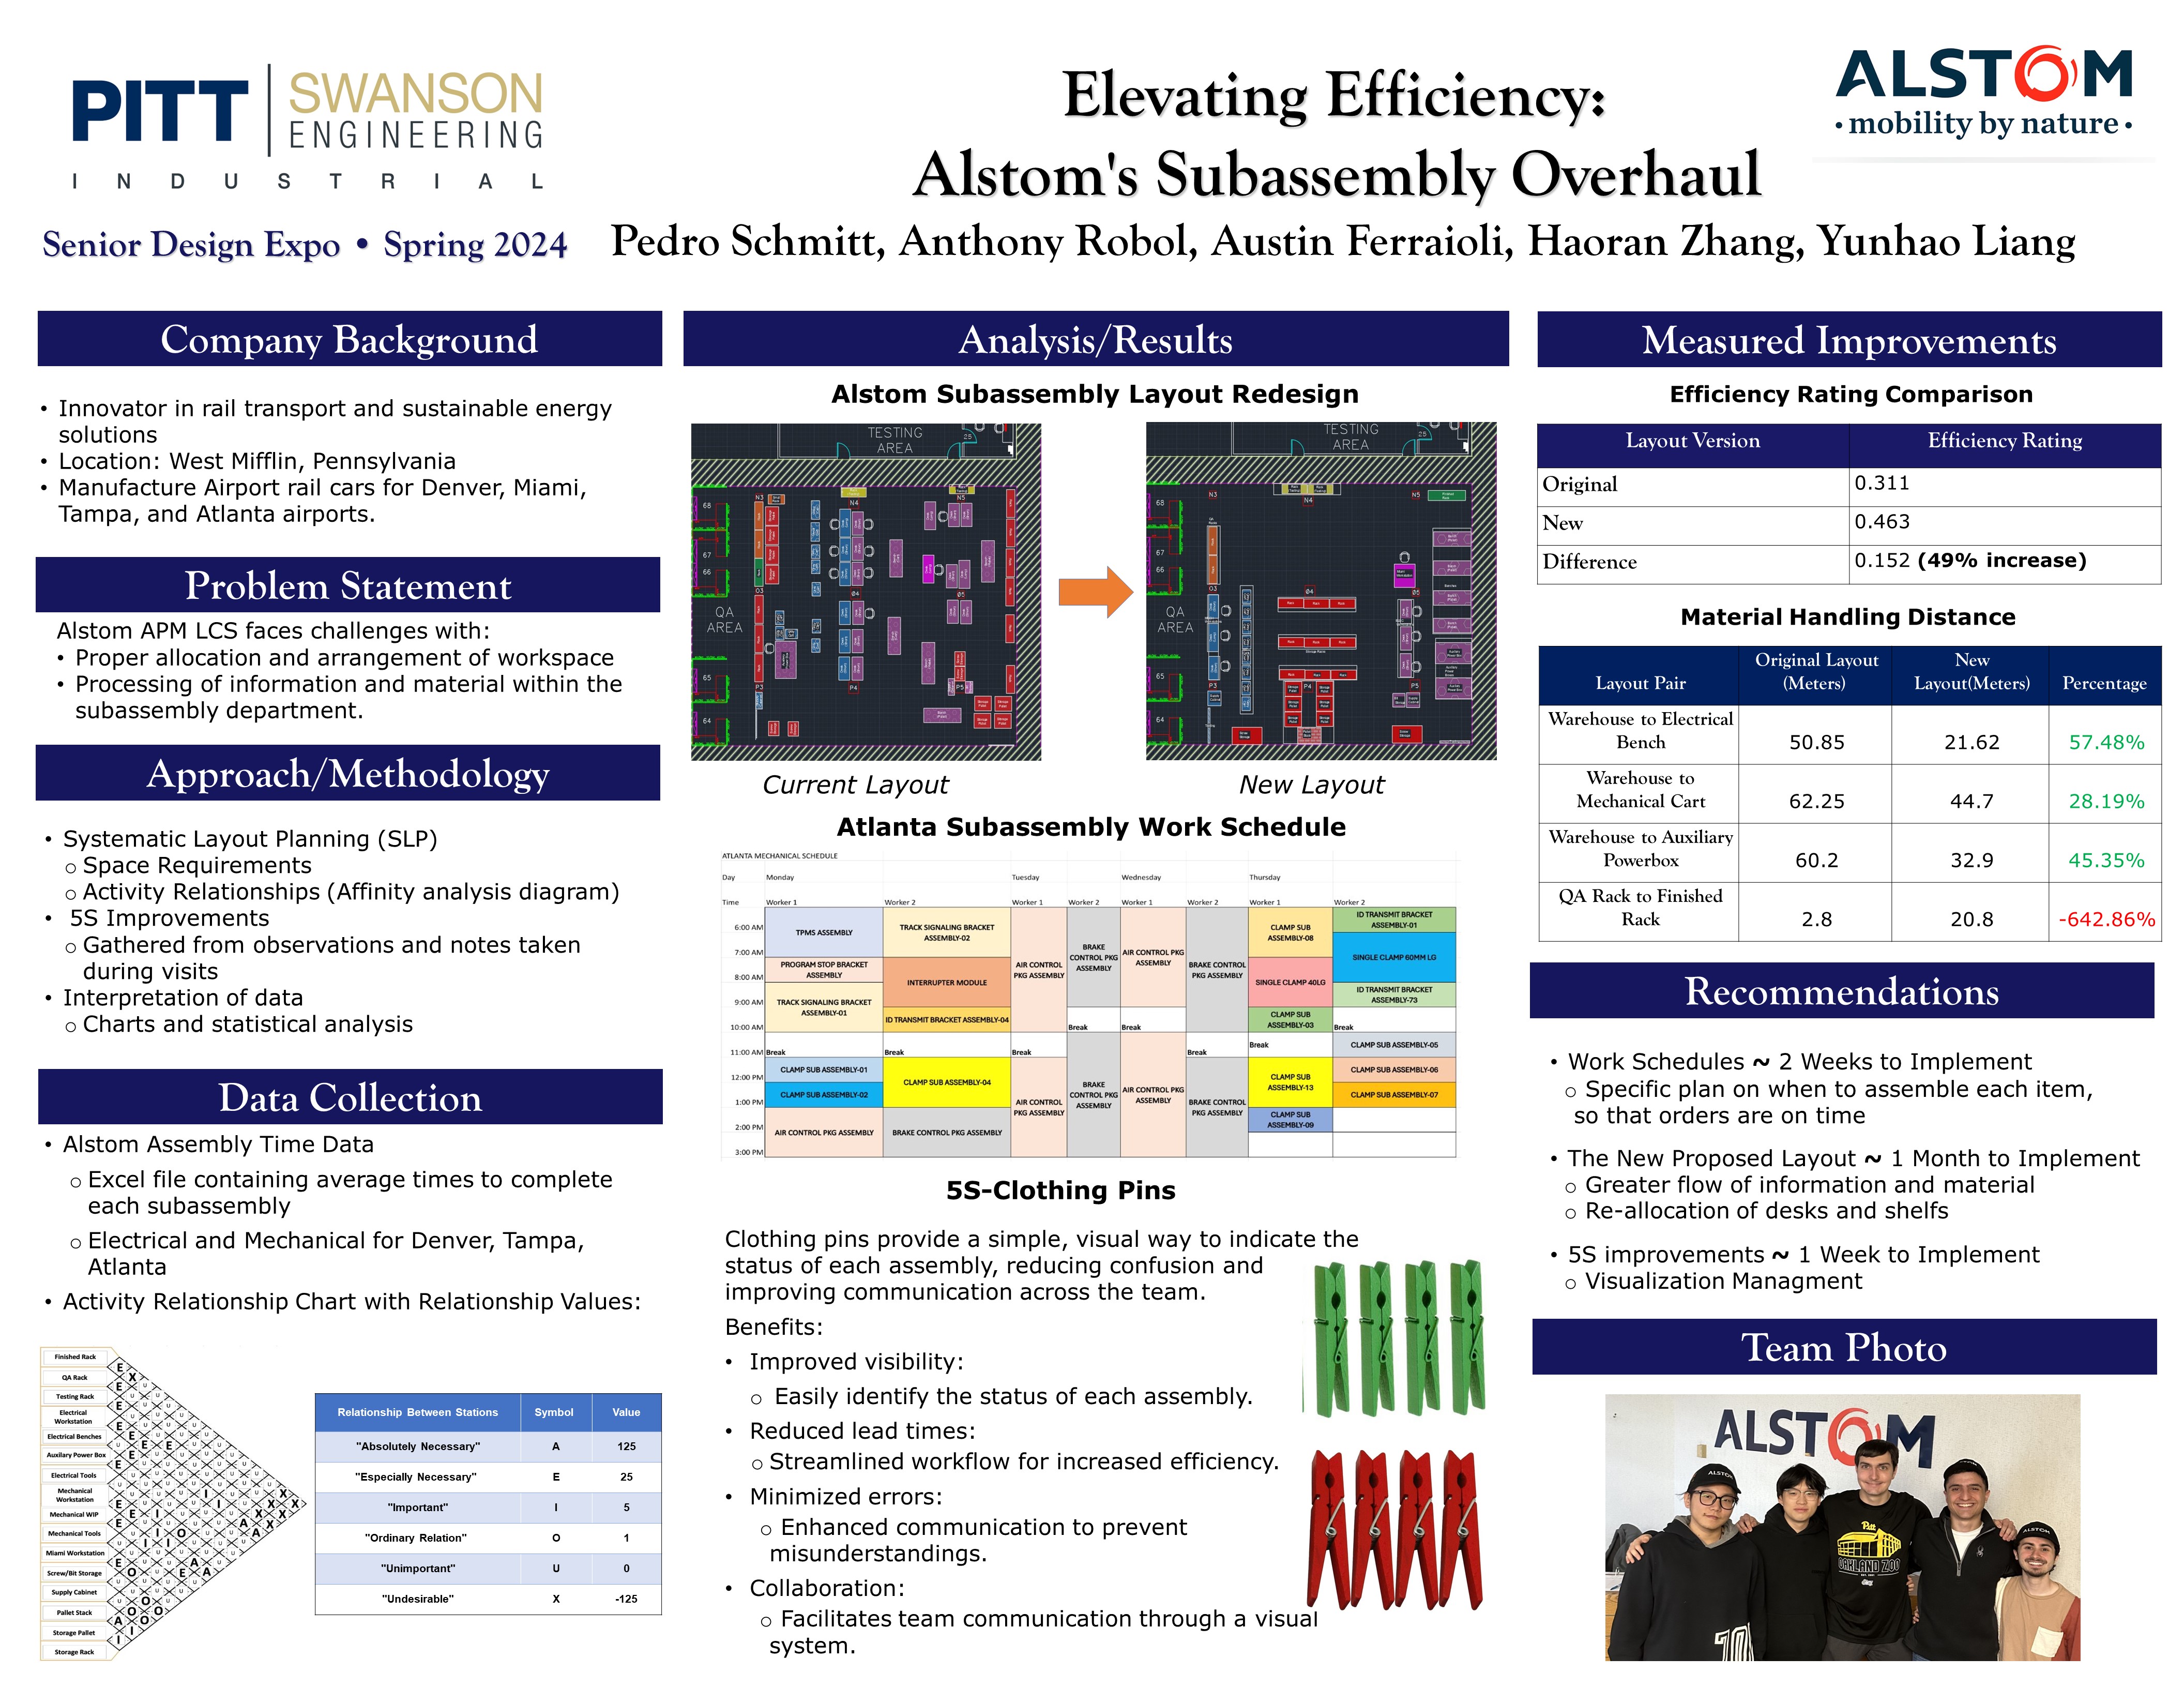 Elevating Efficiency:  Alstom's Subassembly Overhaul research project poster showing overview